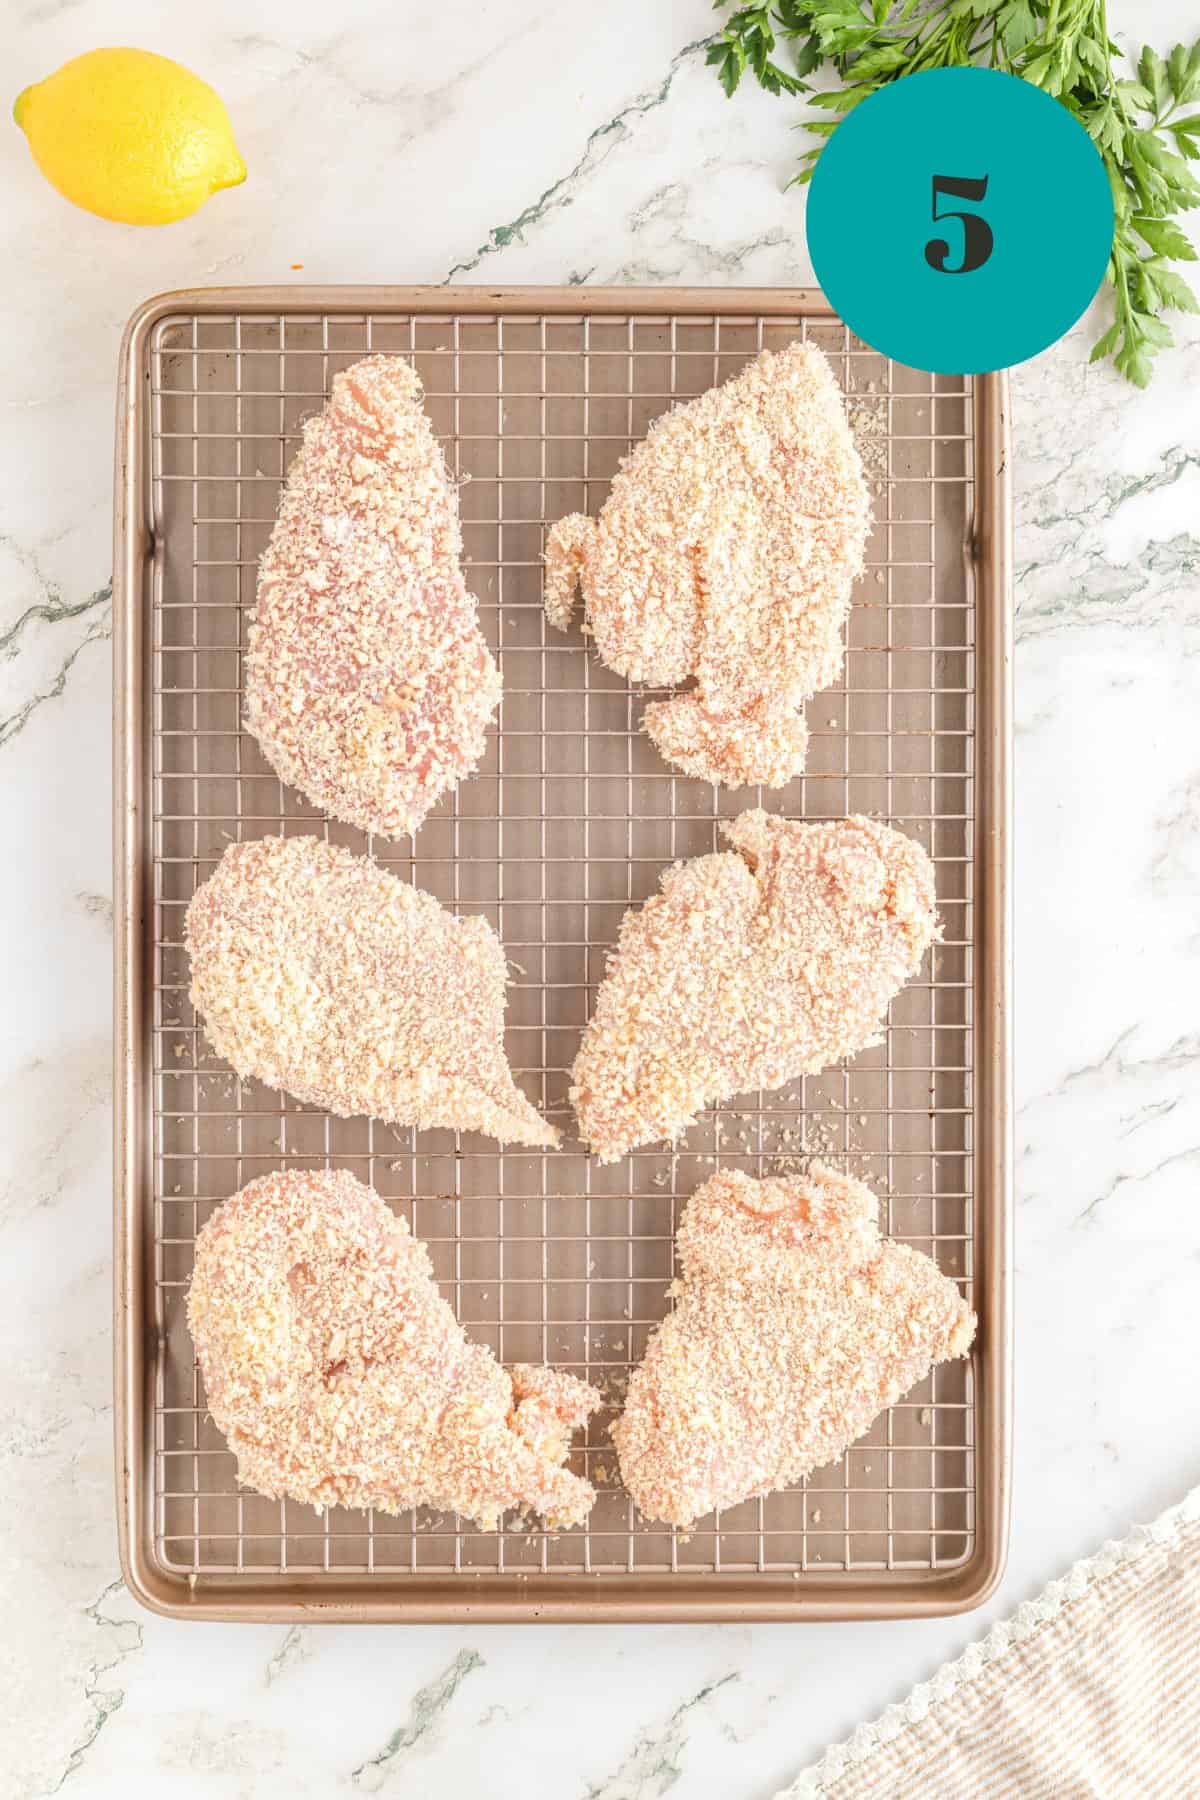 A bunch of uncooked chicken on a baking rack.